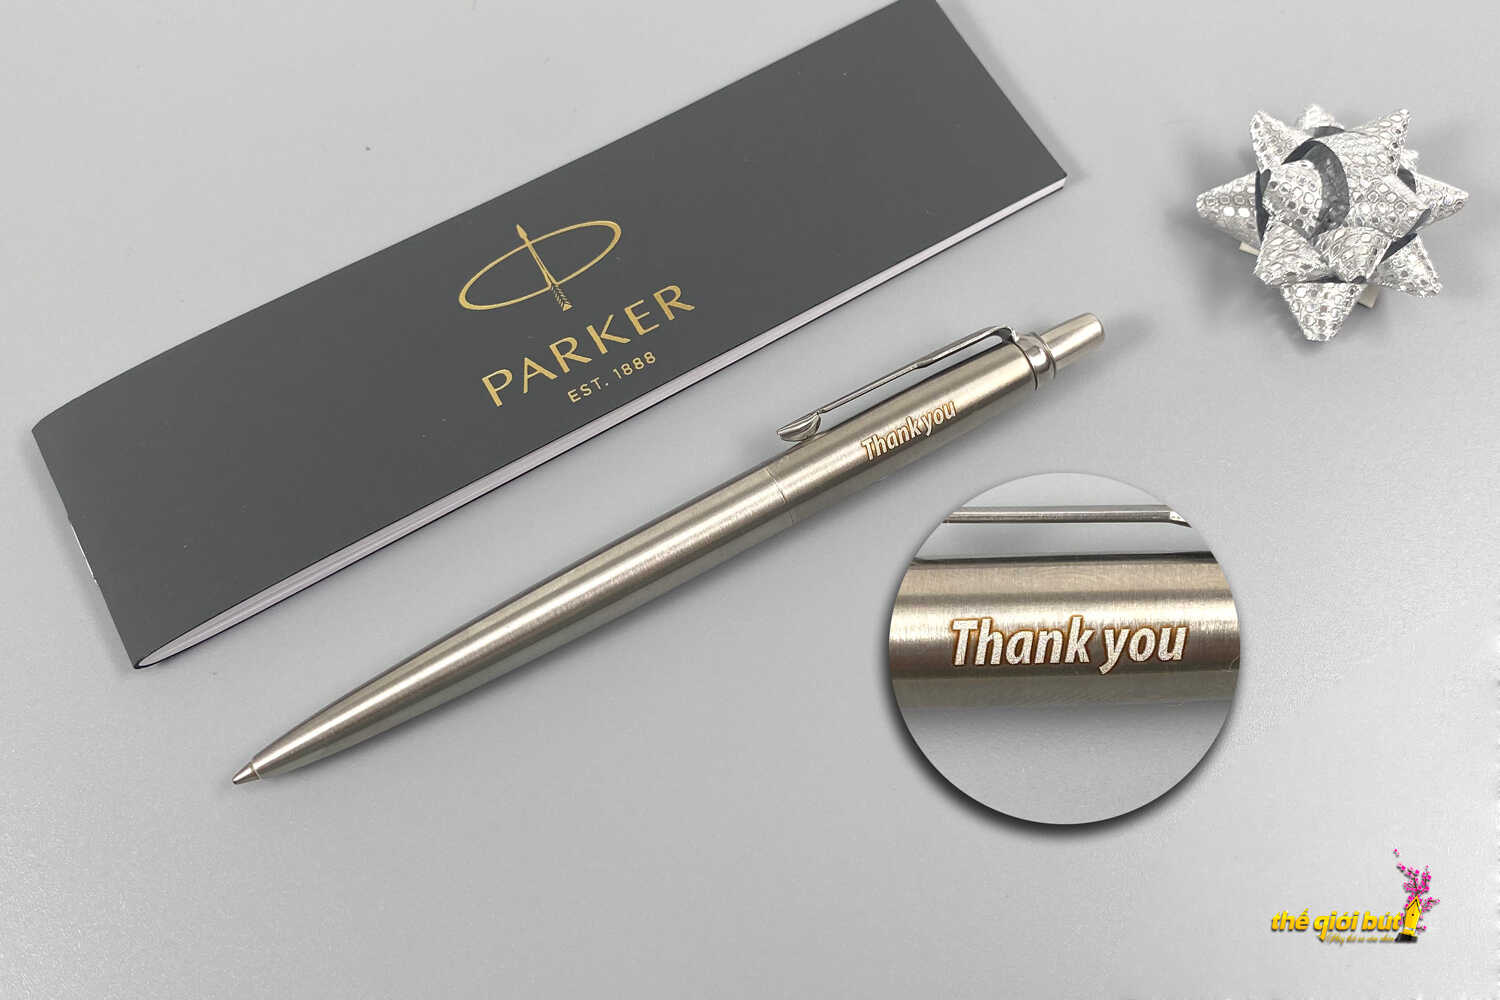 Parker Duofold 135th Anniversary Centennial Fountain Pen Gift Box |  Penworld » More than 10.000 pens in stock, fast delivery